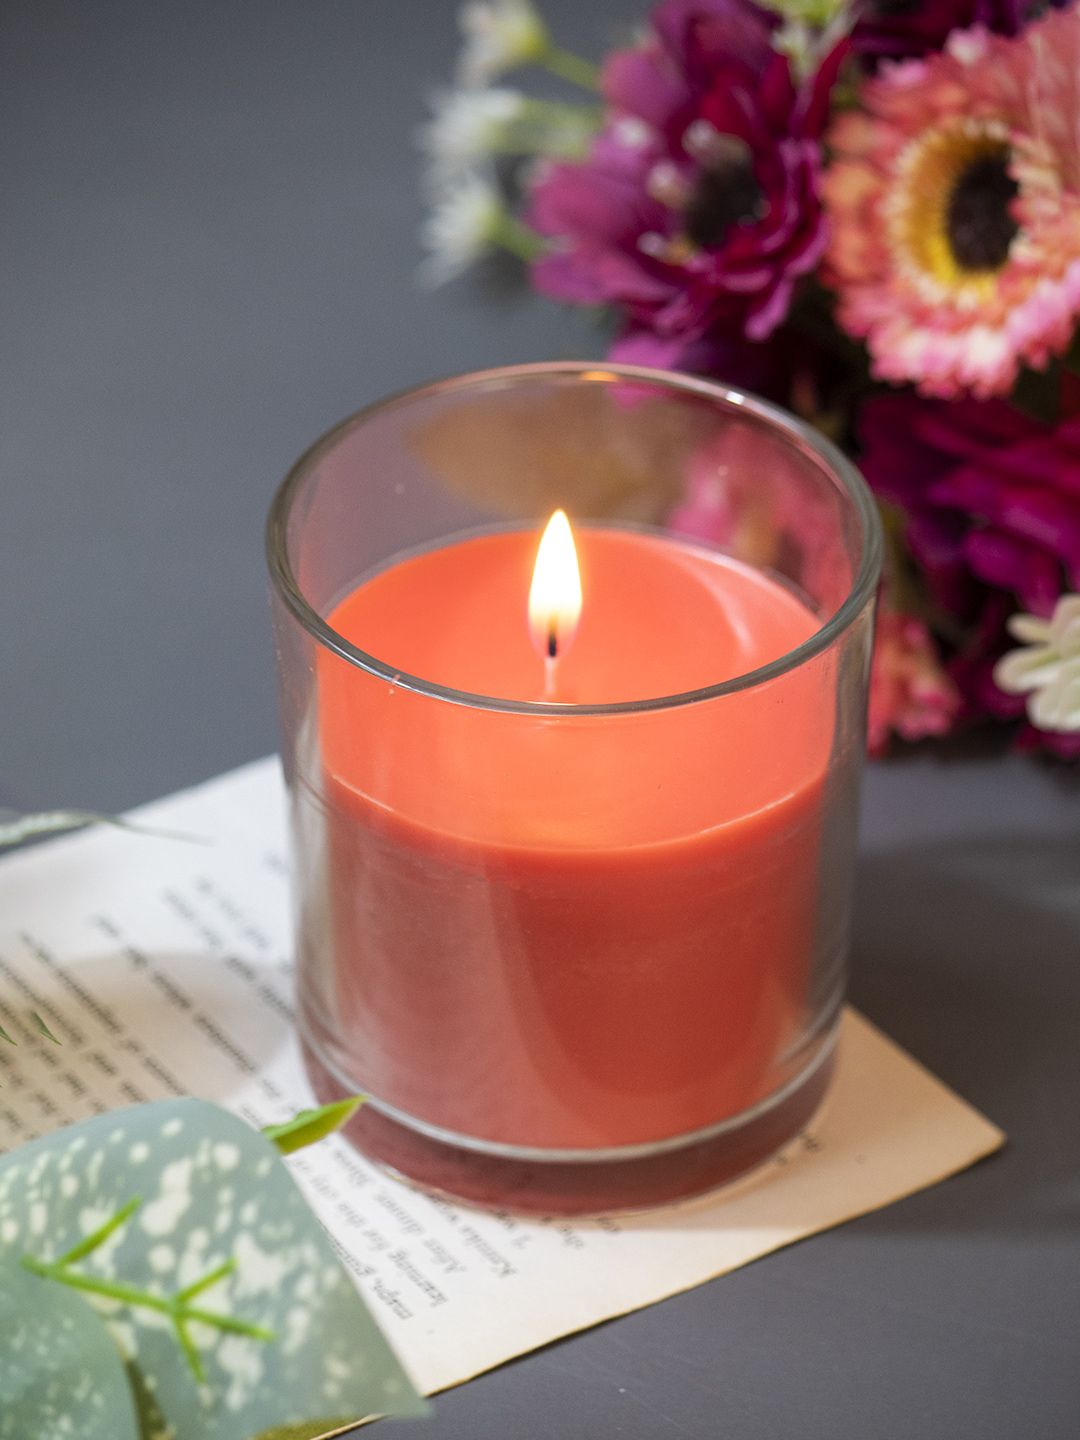 MARKET99 Red Solid Rose Fragrance Candle Price in India